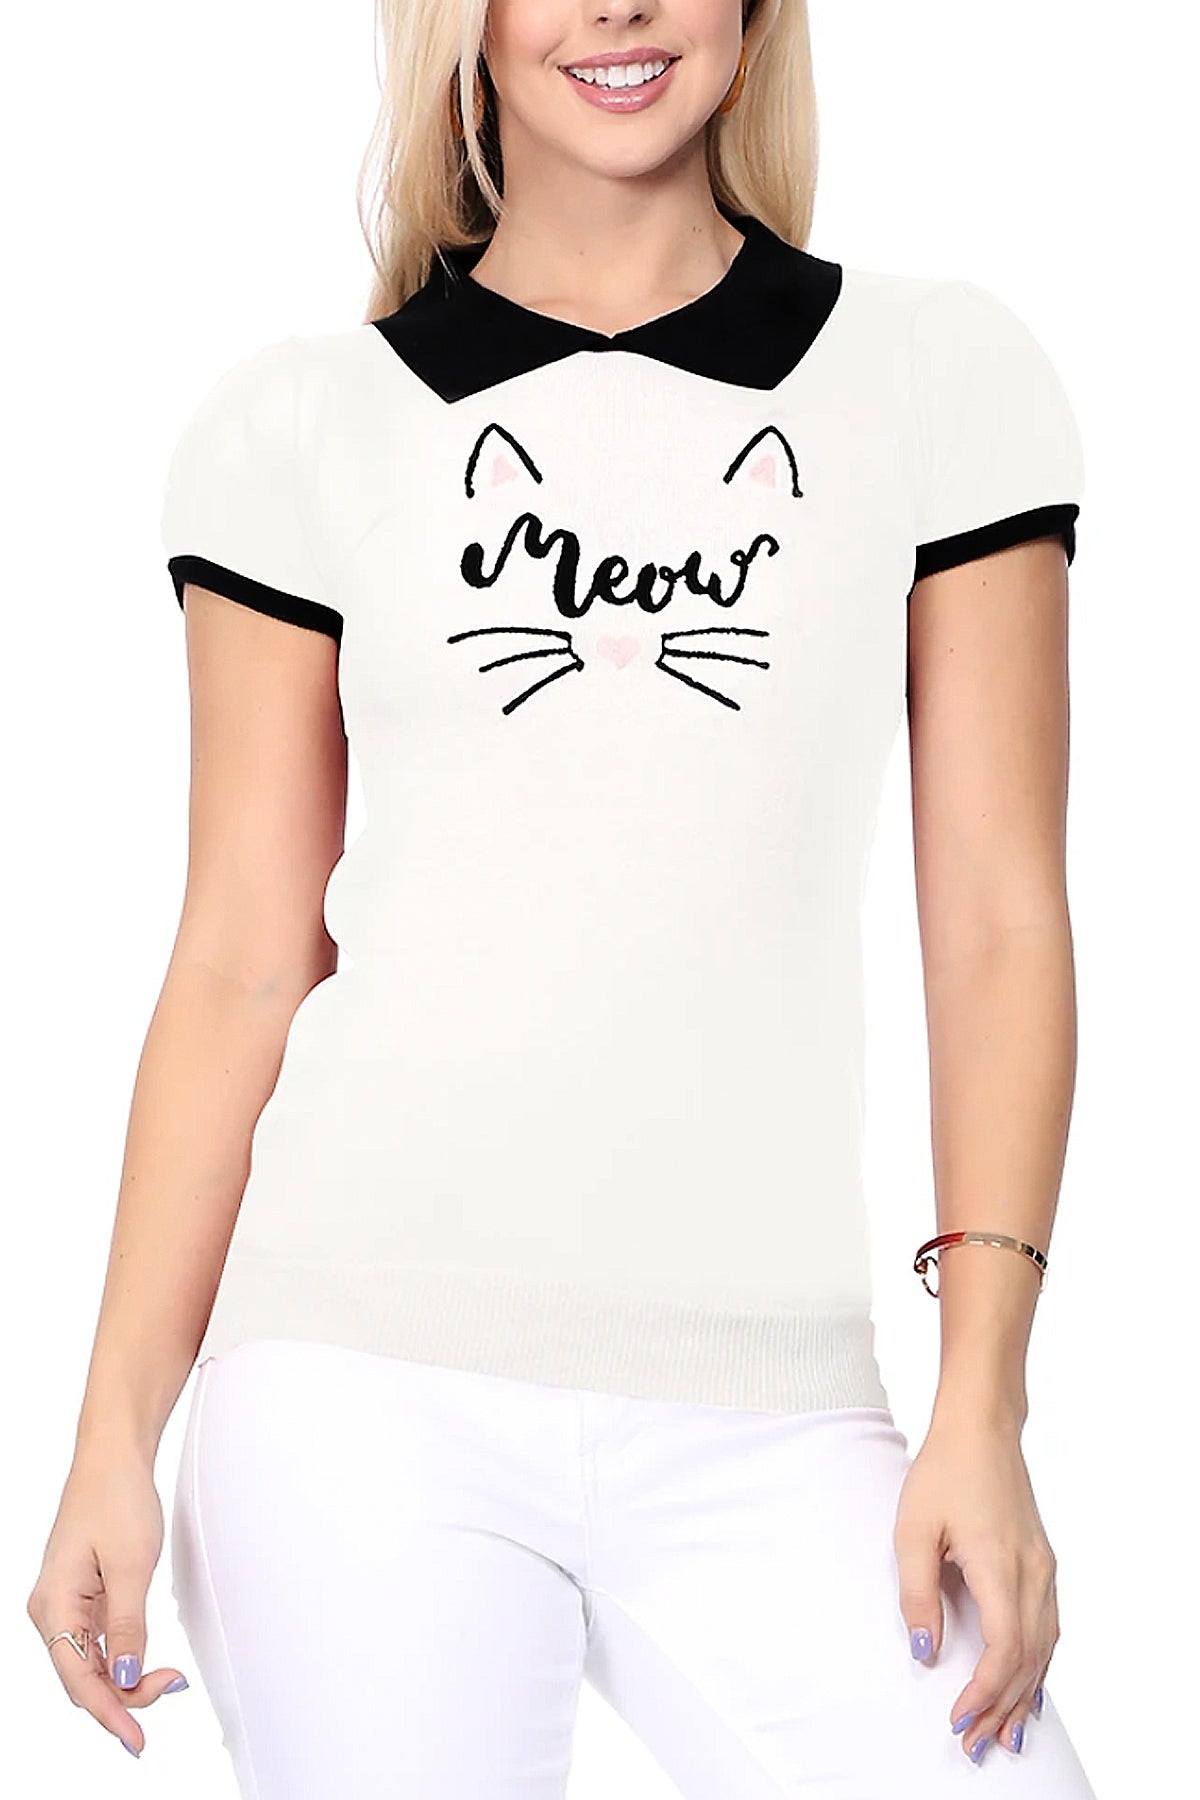 Meow Collared Sweater Top